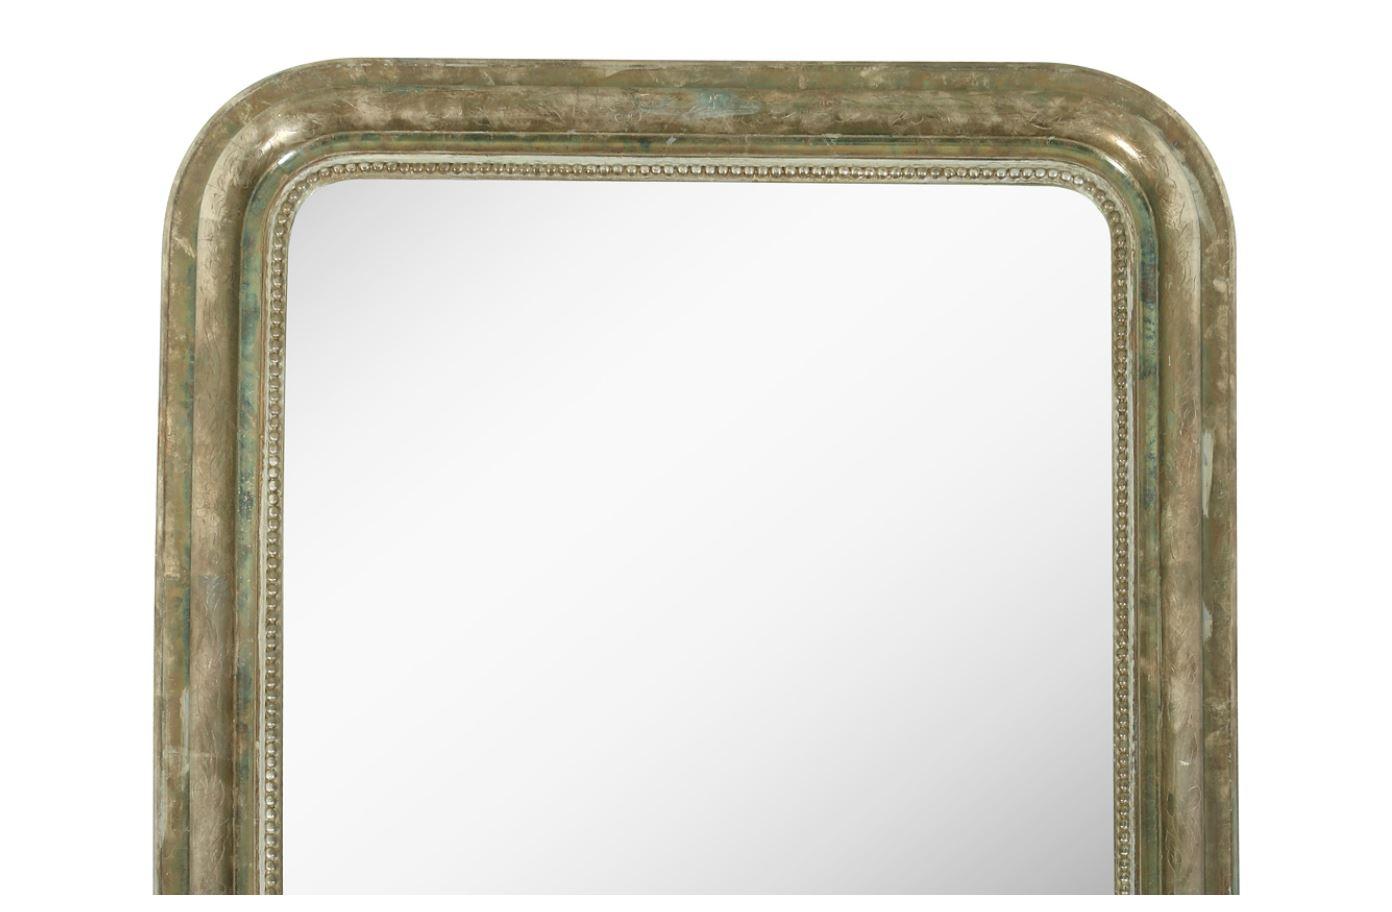 Antique gilt silver Louis Philippe mirror with inset bead detail.